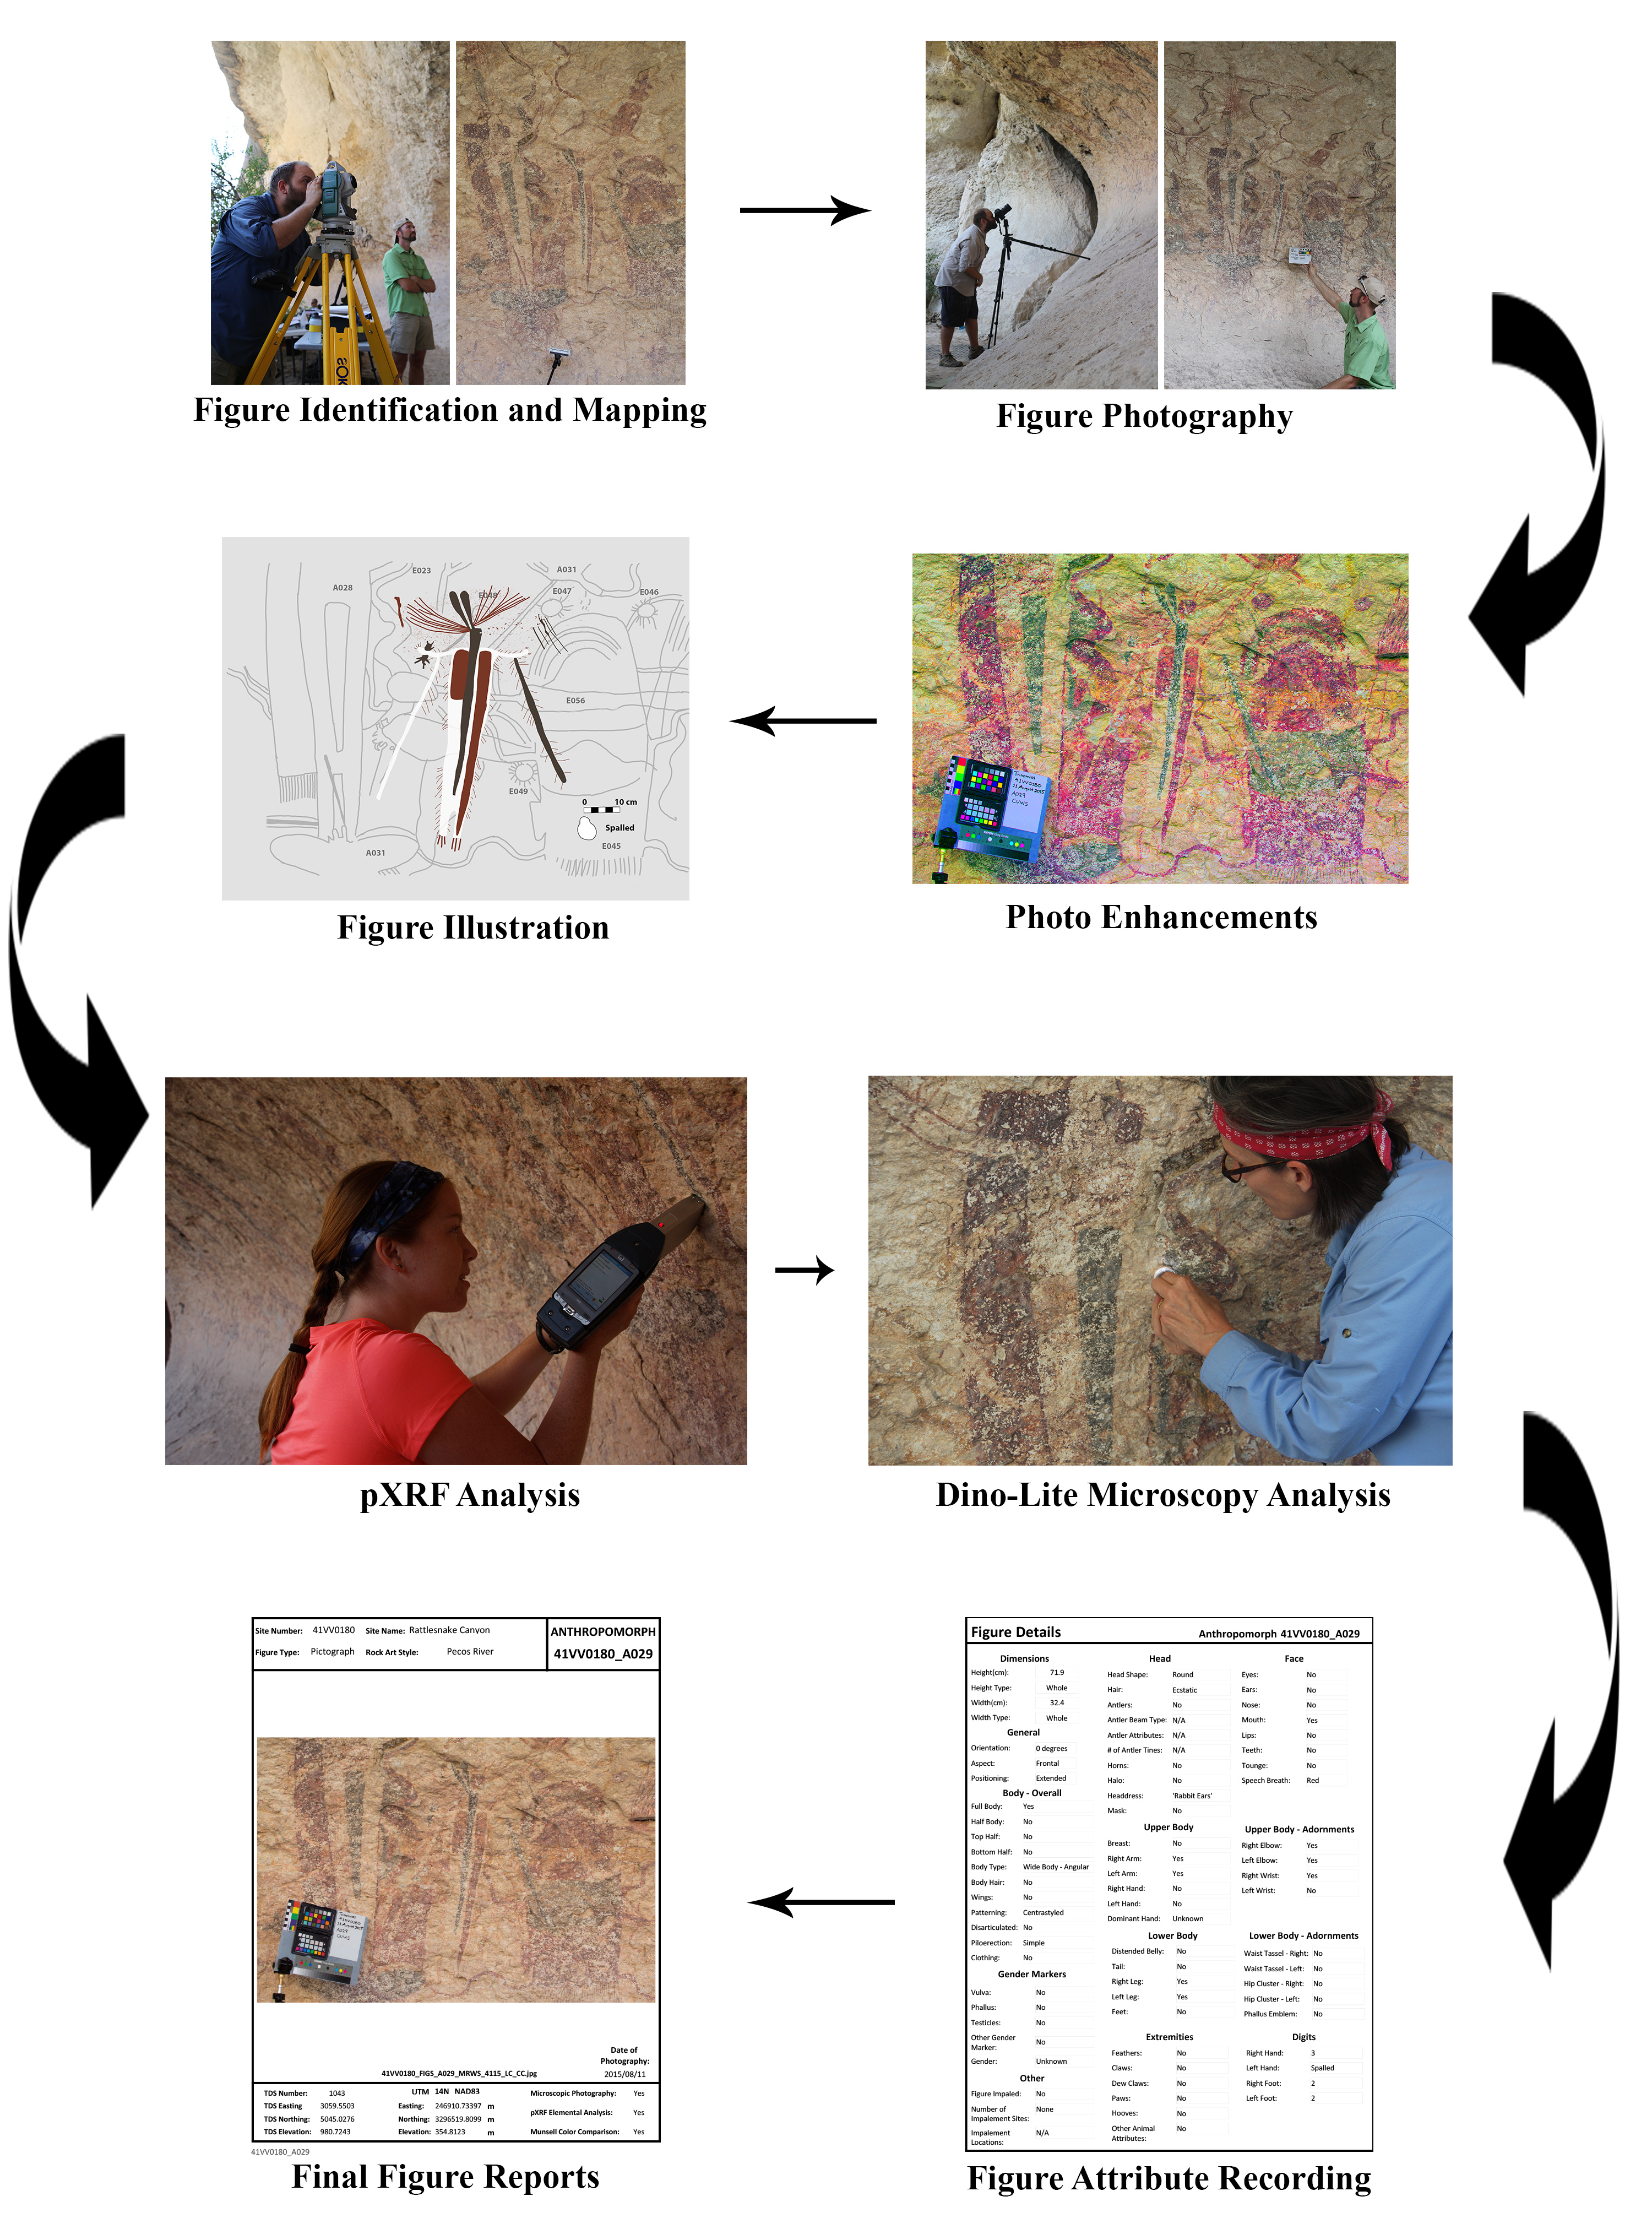 This flowchart illustrates a simplified “day” in the life for a single figure at a site that is receiving full Shumla documentation. Depending on the number of figures at a site and/or the complexity of the mural, this could take months or years.